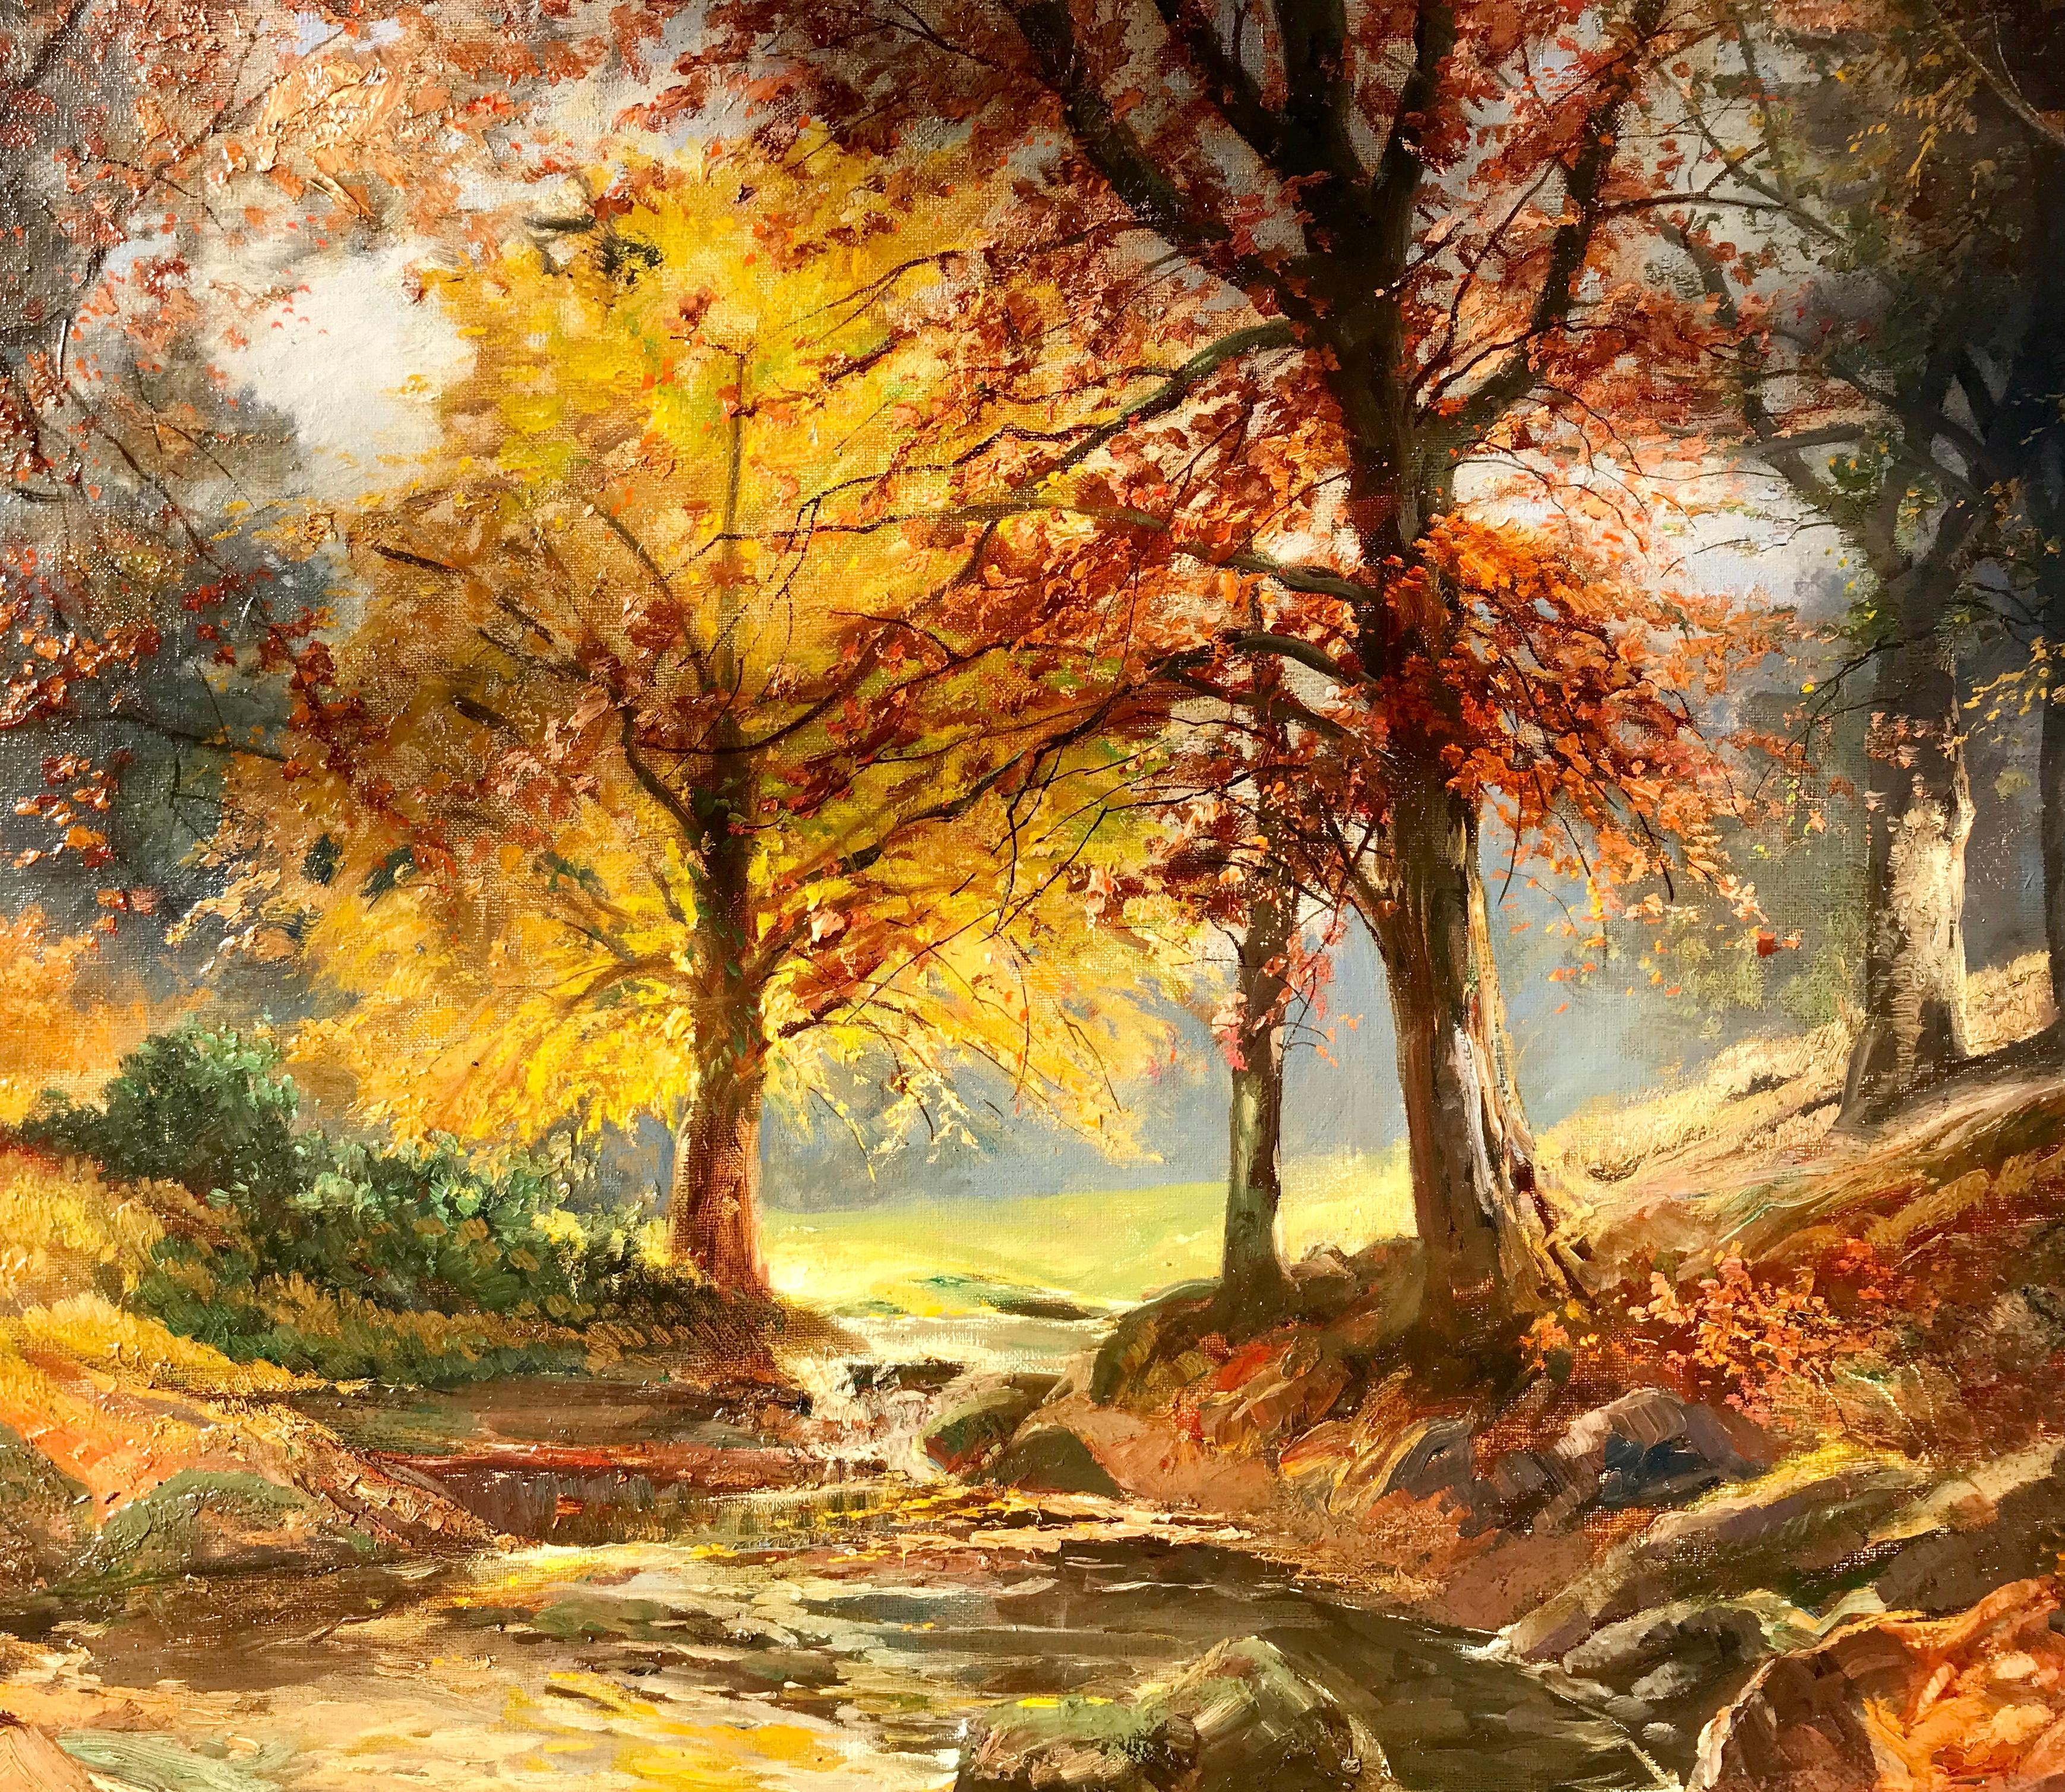 “Early Autumn, Bronxville Woods” - Painting by George Henry Smillie